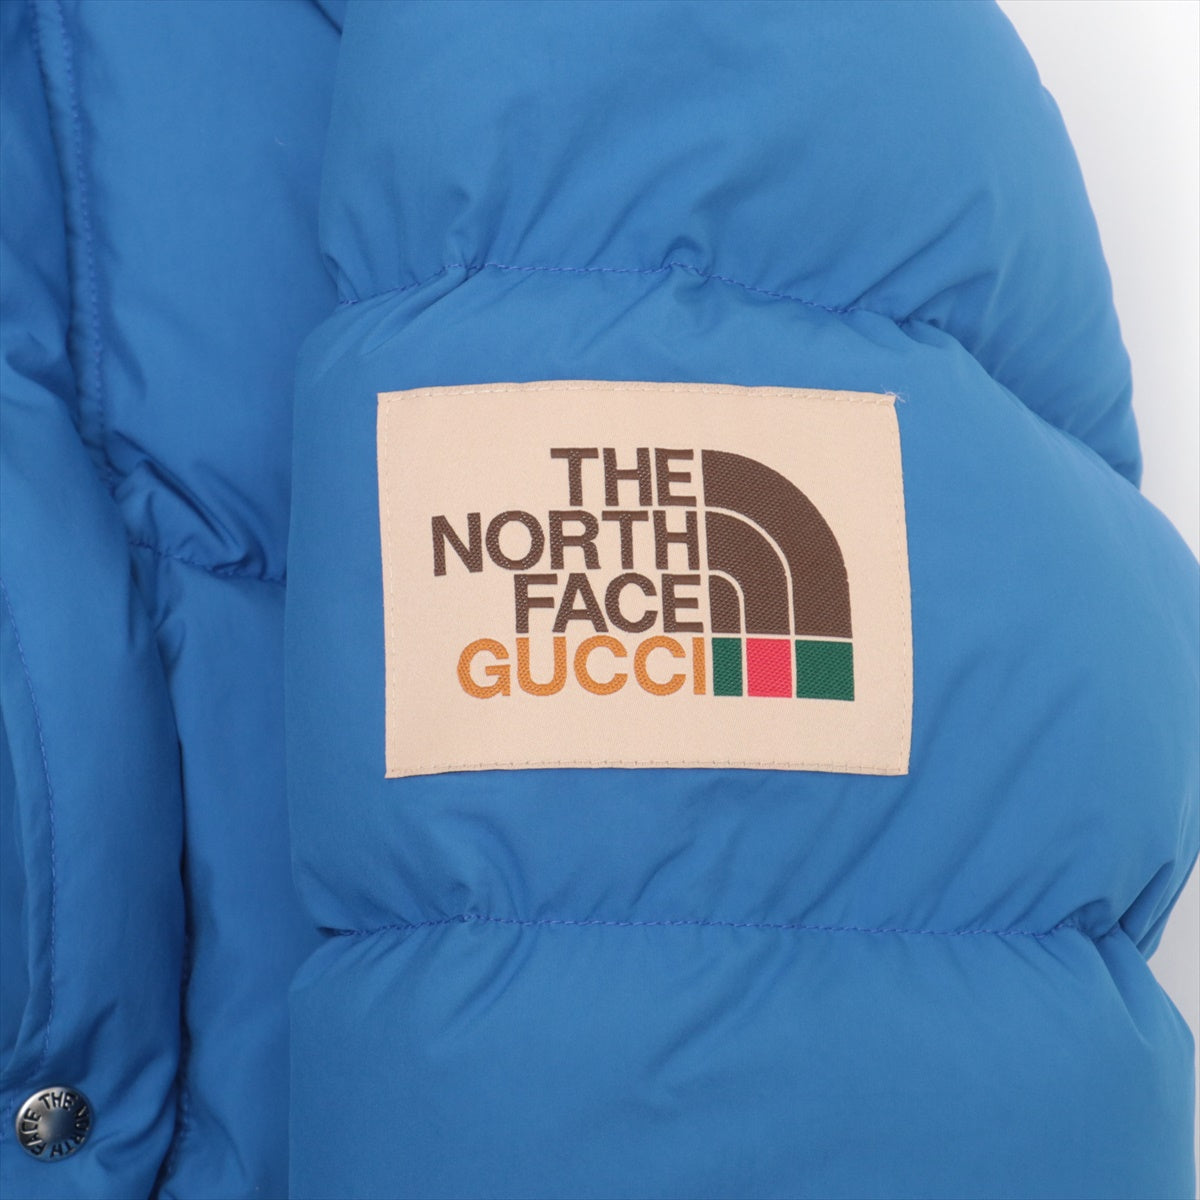 Gucci x North Face Polyester & Nylon Down jacket XXS Men's Blue  649241 Removable hood